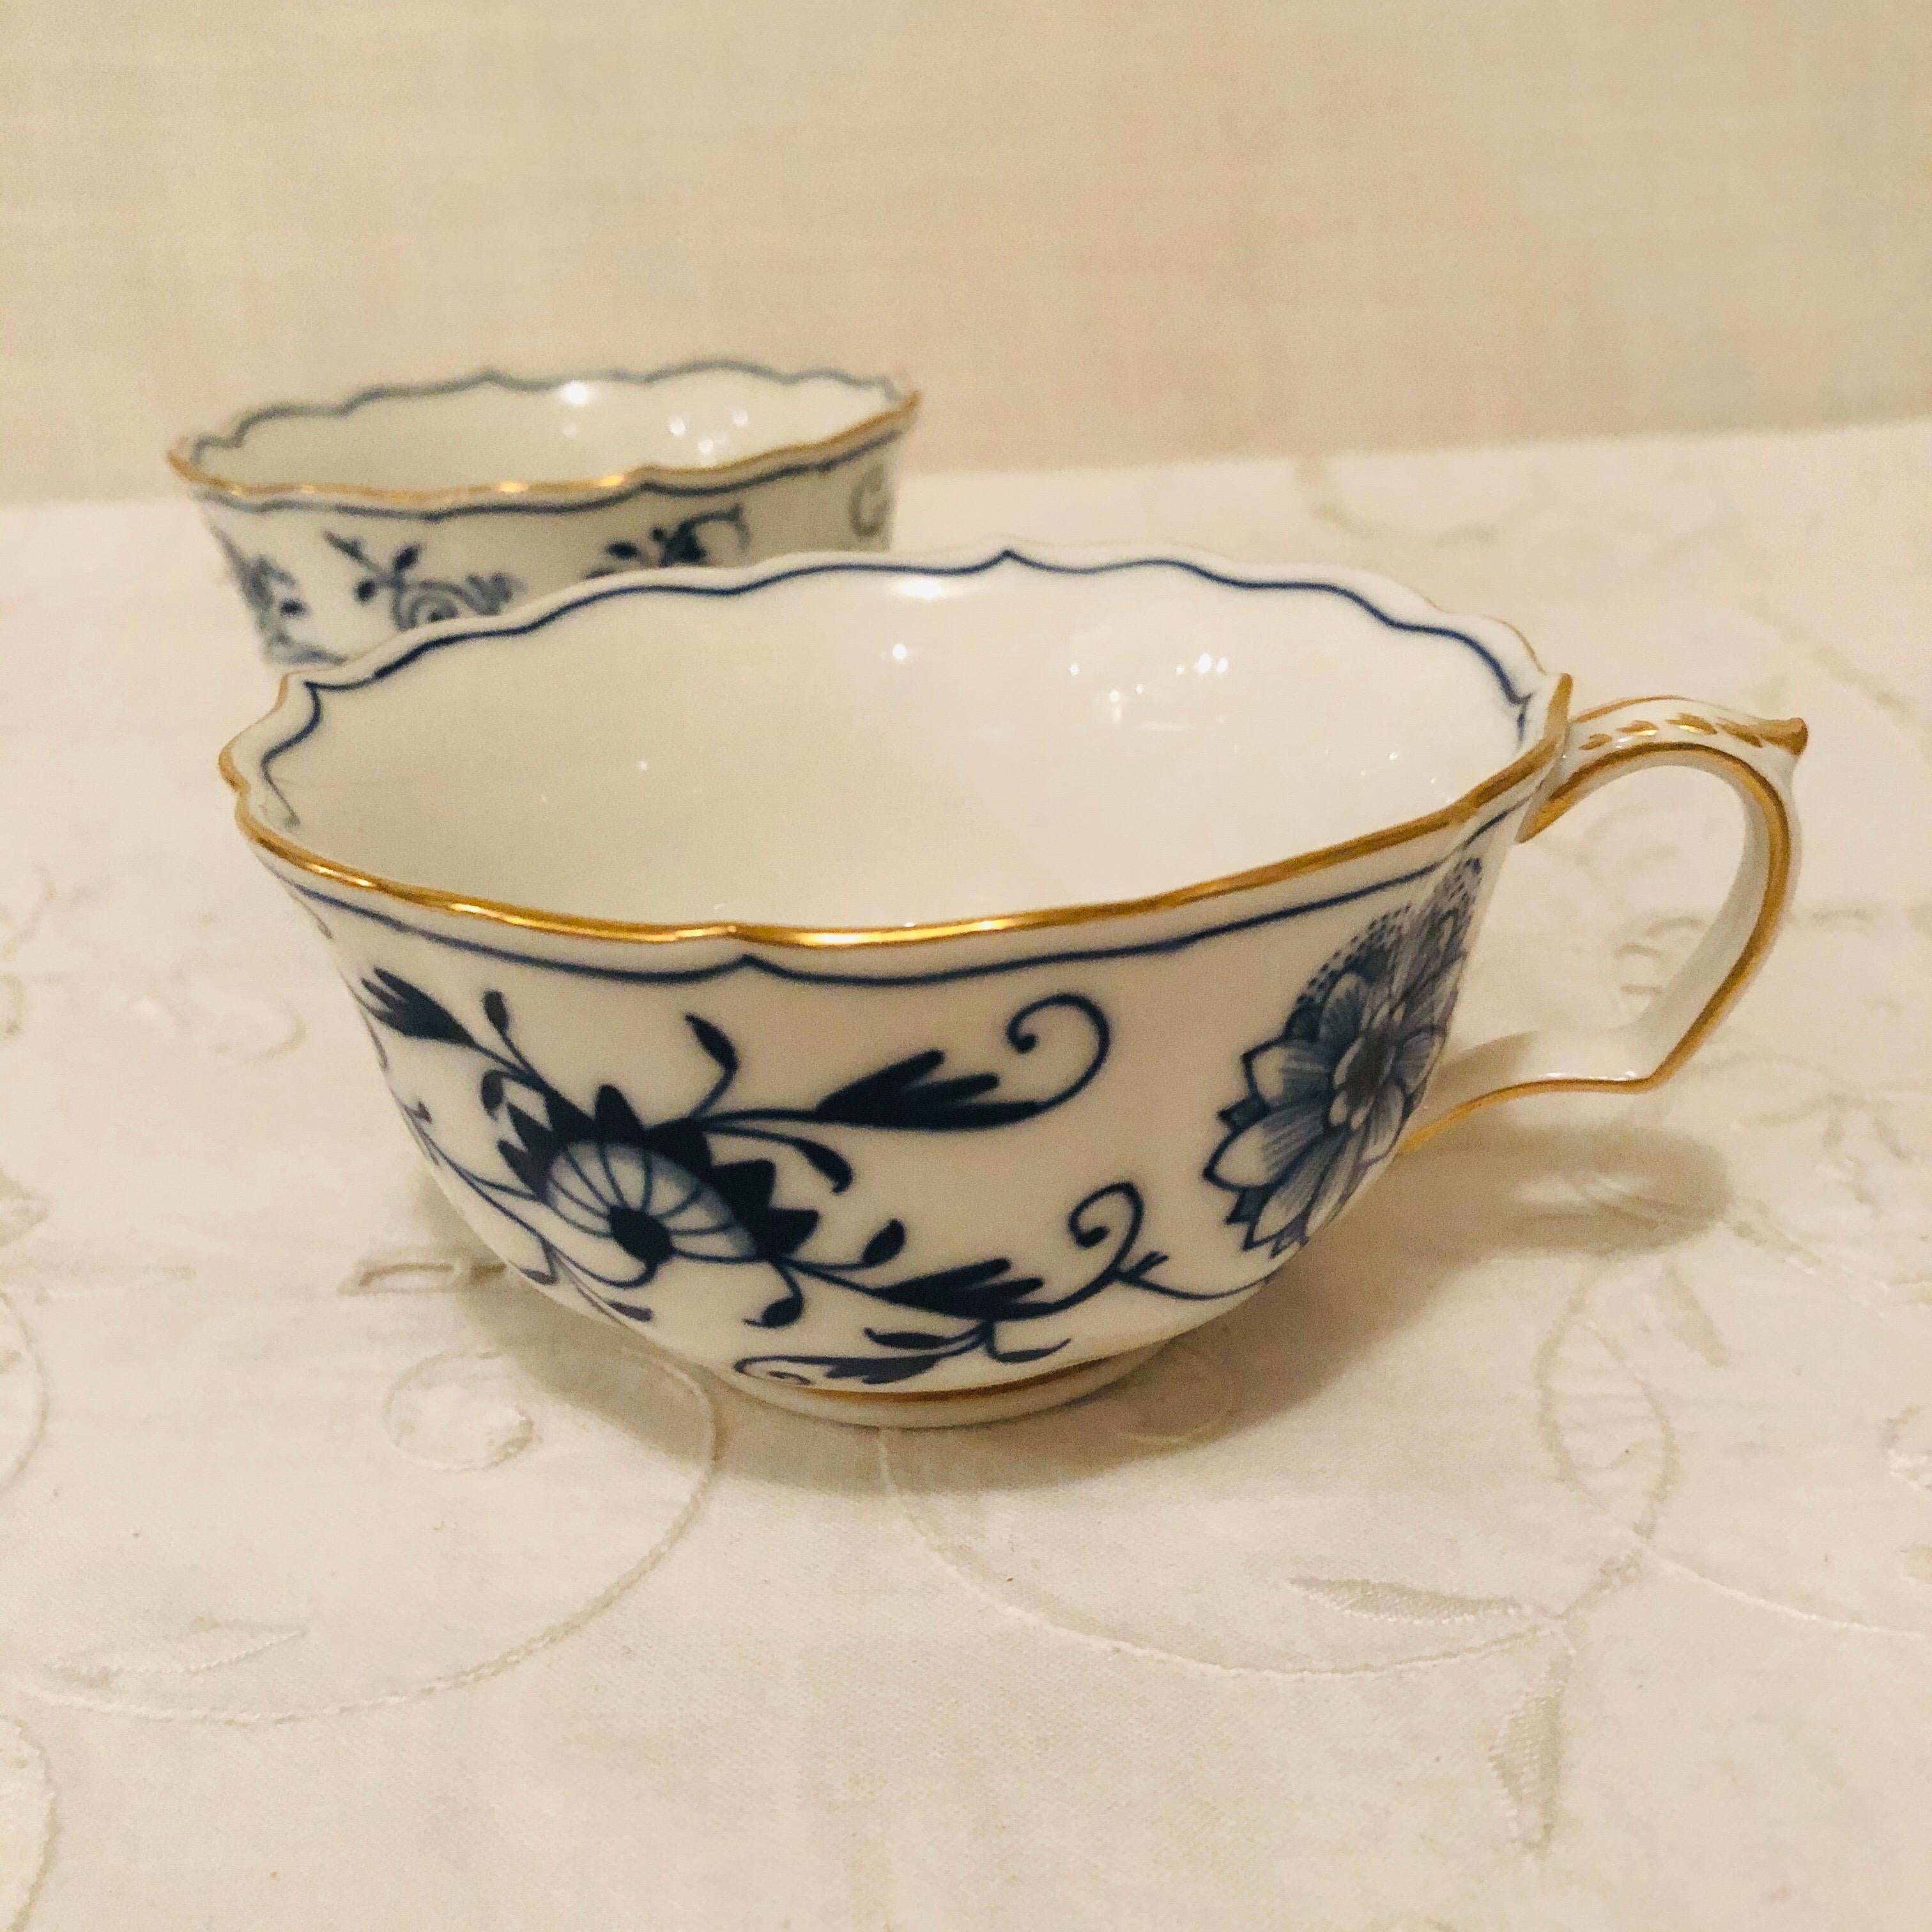 Other Set of 12 Meissen Blue Onion Teacups and Saucers with a Gold Rim